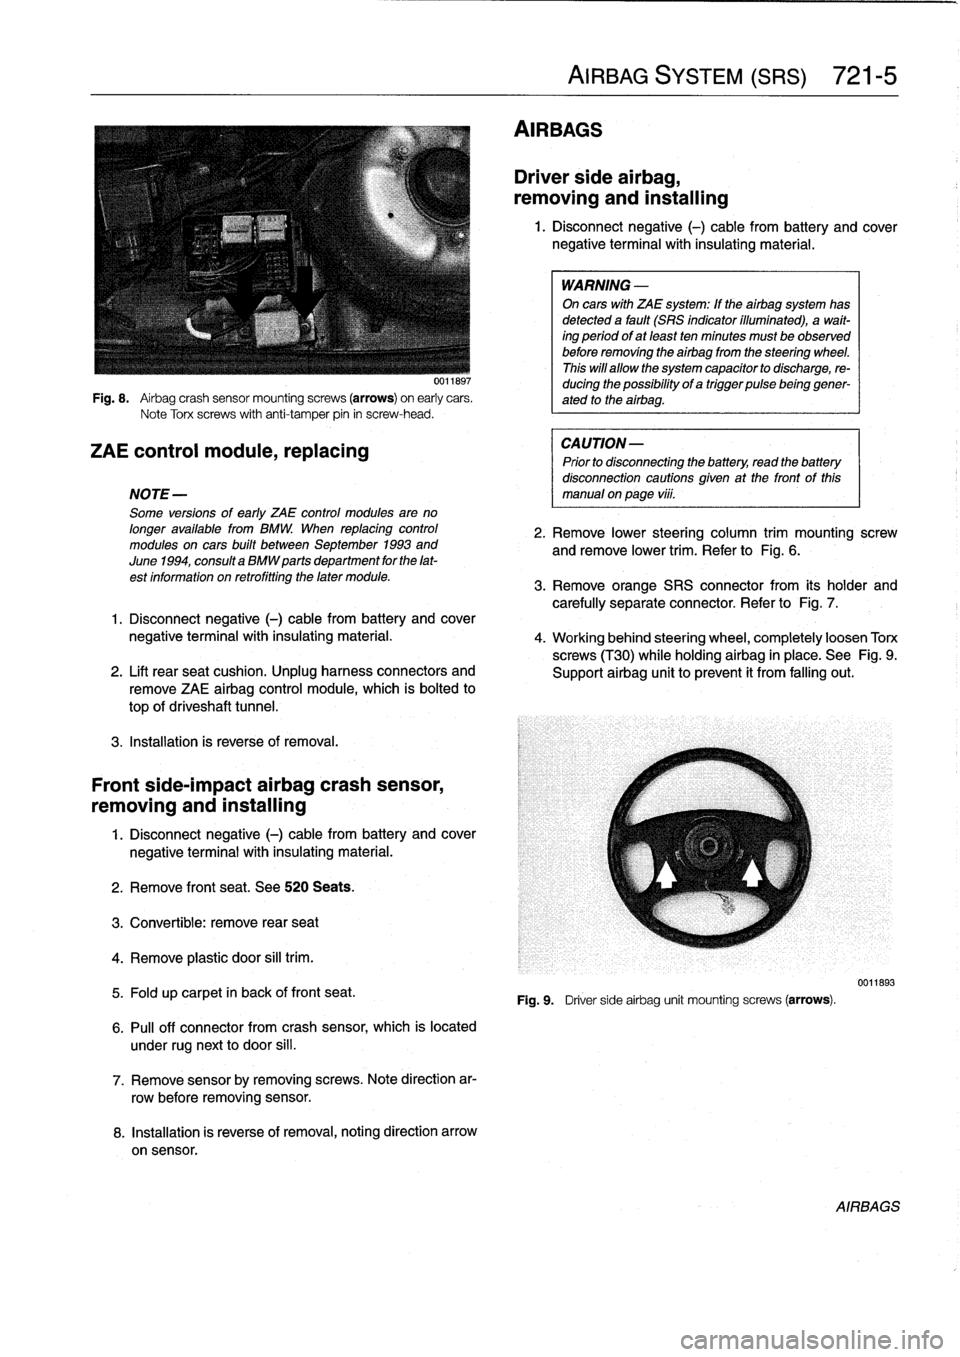 BMW 318i 1997 E36 Repair Manual 
Fig
.
8
.

	

Airbag
crash
sensor
mountingscrews
(arrows)
on
early
cars
.
Note
Torx
screws
with
anti-tamper
pin
in
screw-head
.

ZAE
control
module,
replacing

NOTE-

Some
versions
of
early
ZAE
contr